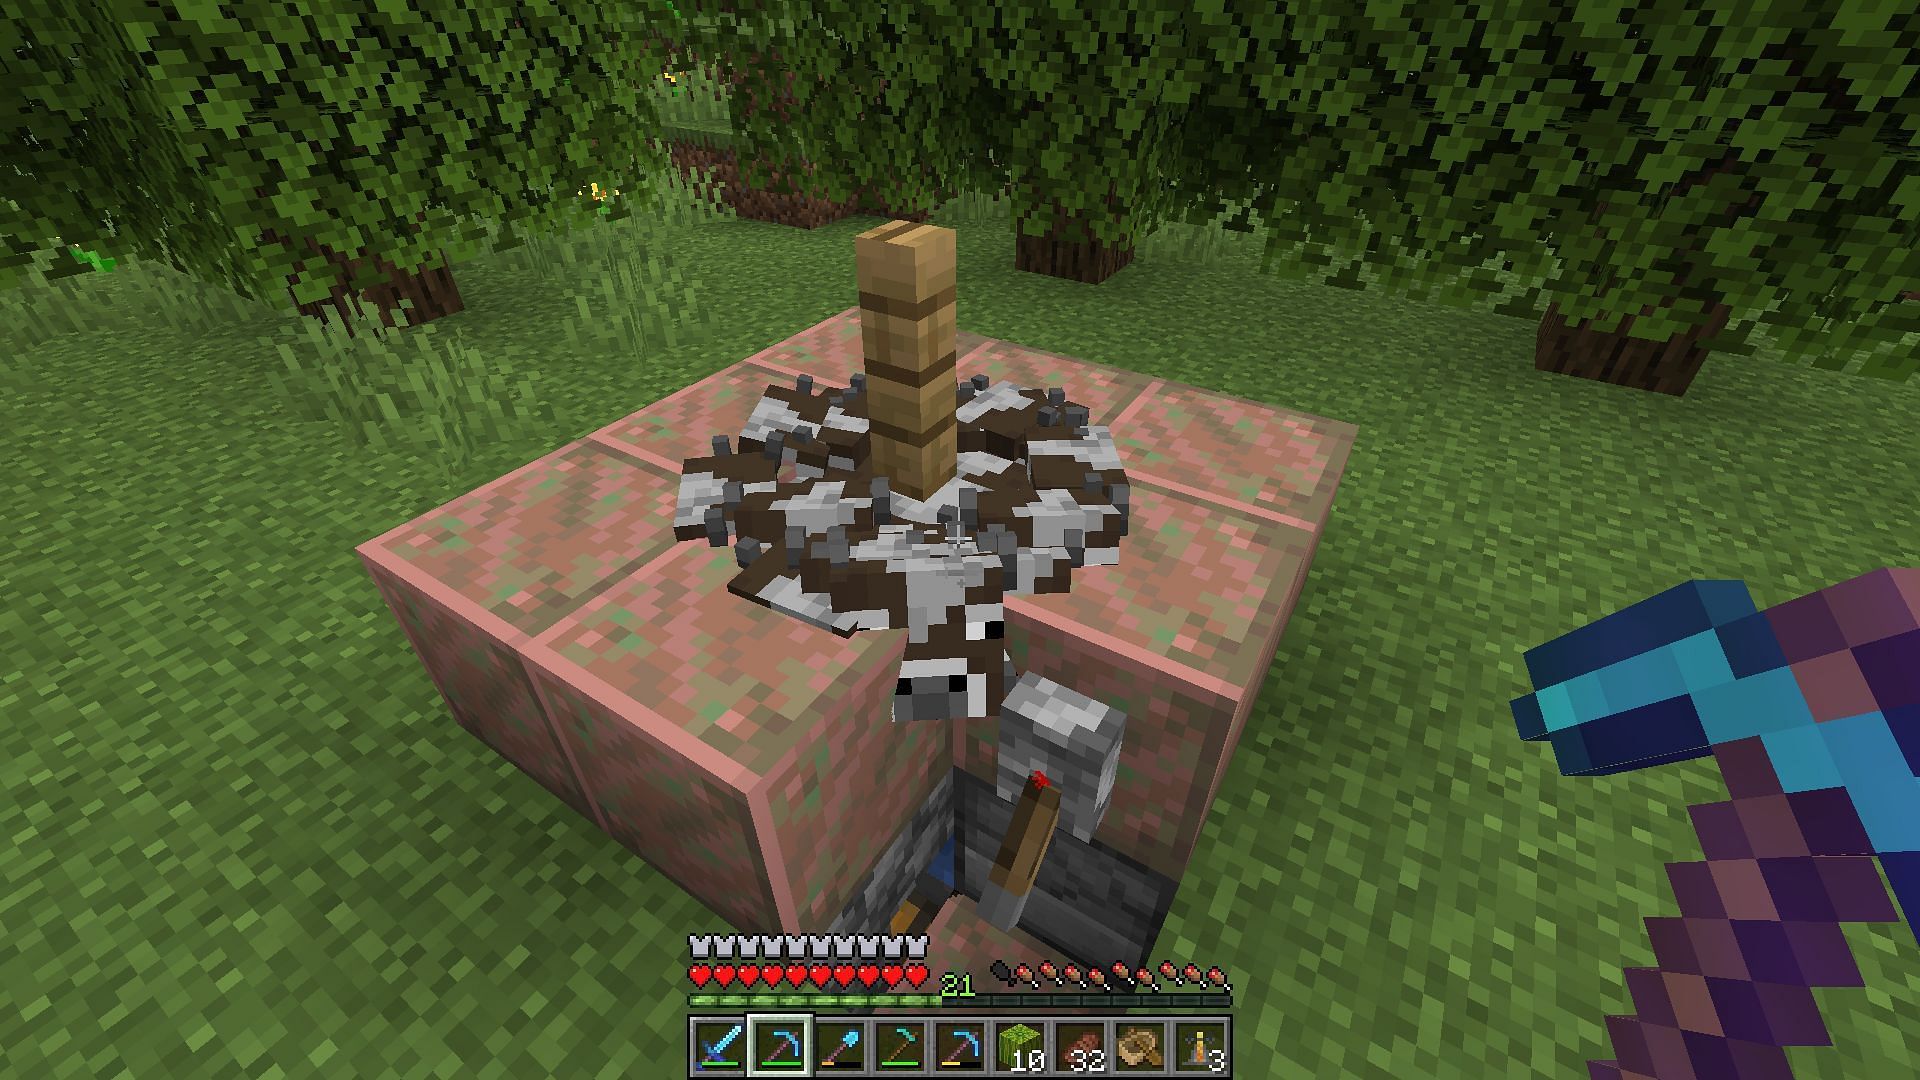 An example of a cow crusher in a survival world (Image via Minecraft)